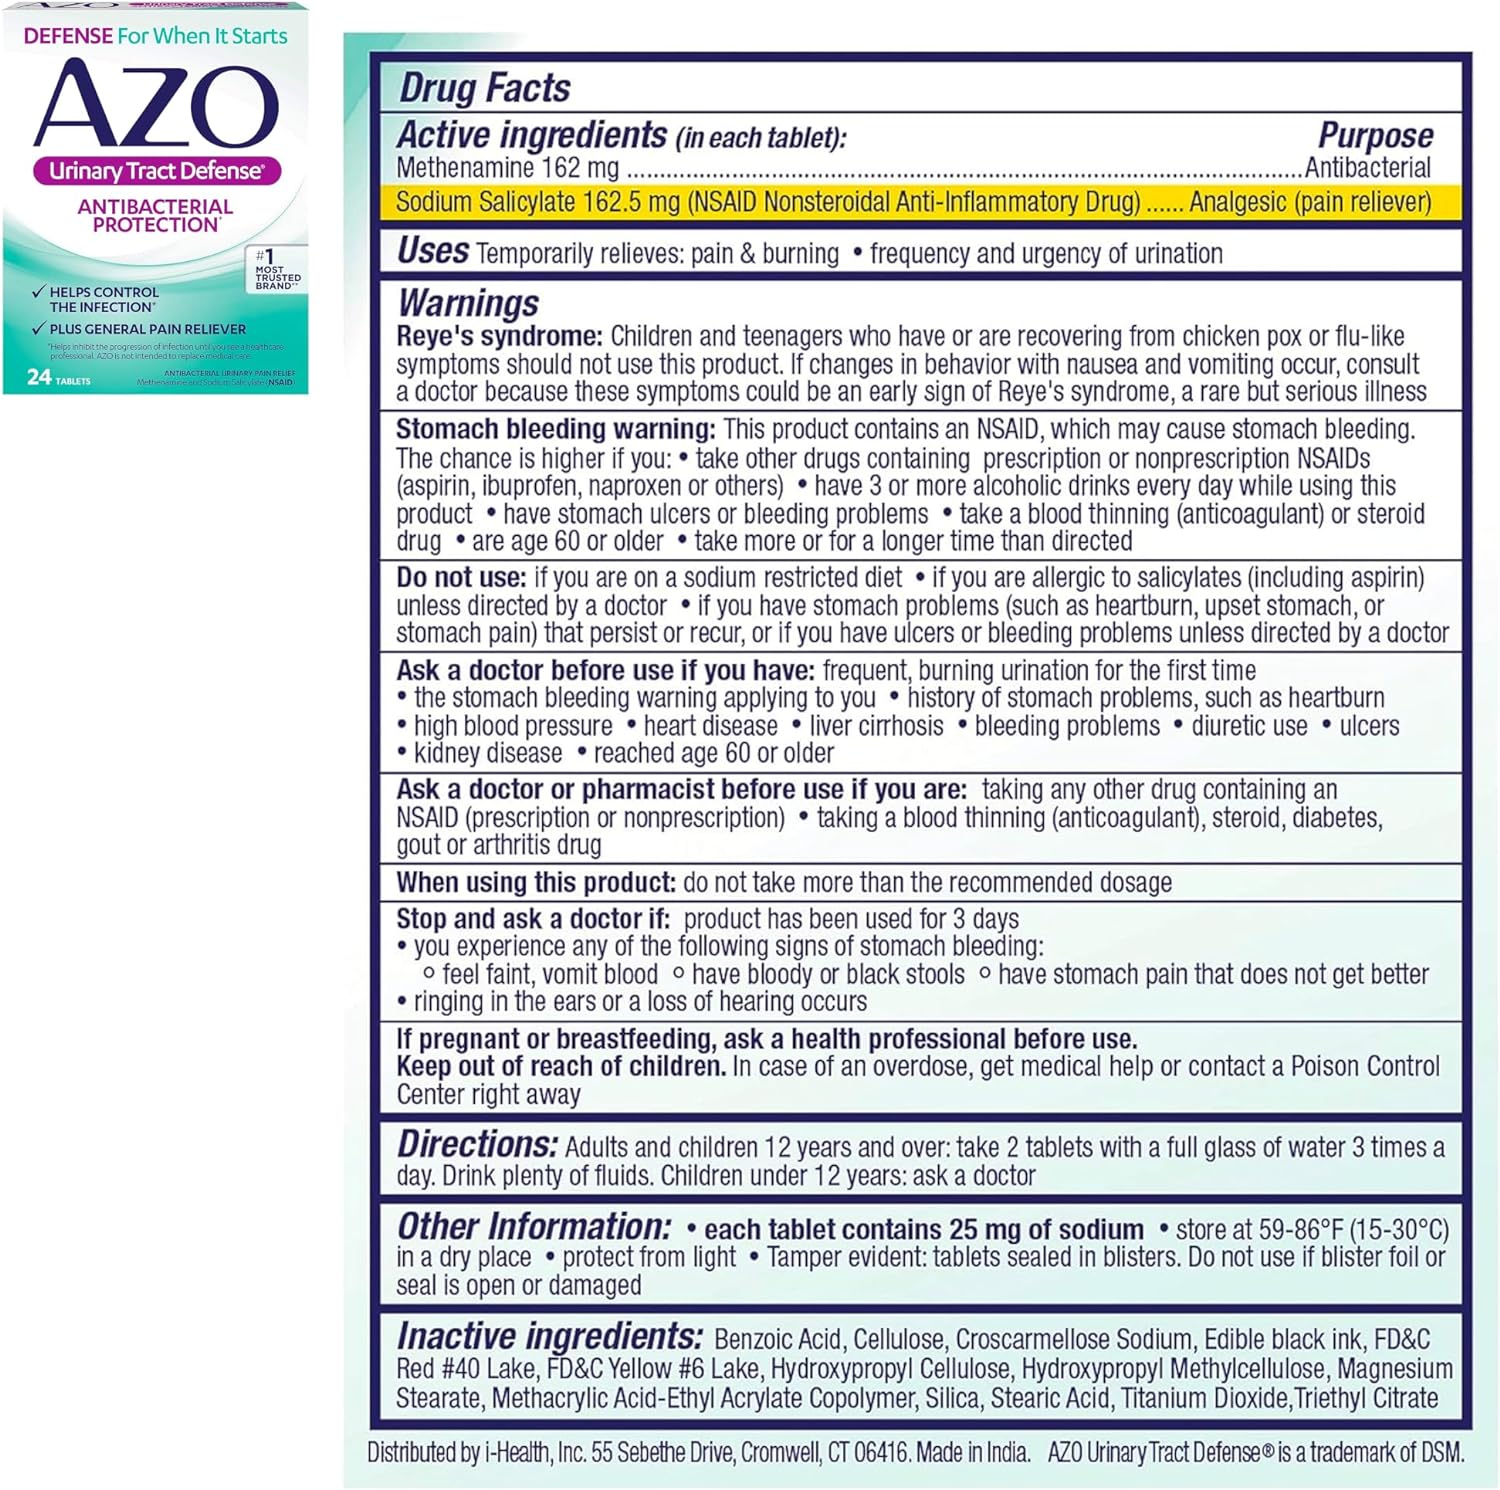 AZO Urinary Tract Defense Antibacterial Protection, Helps Control a UTI Until You Can See a Doctor, No. 1 Most Trusted Urinary Health Brand, 18 Count